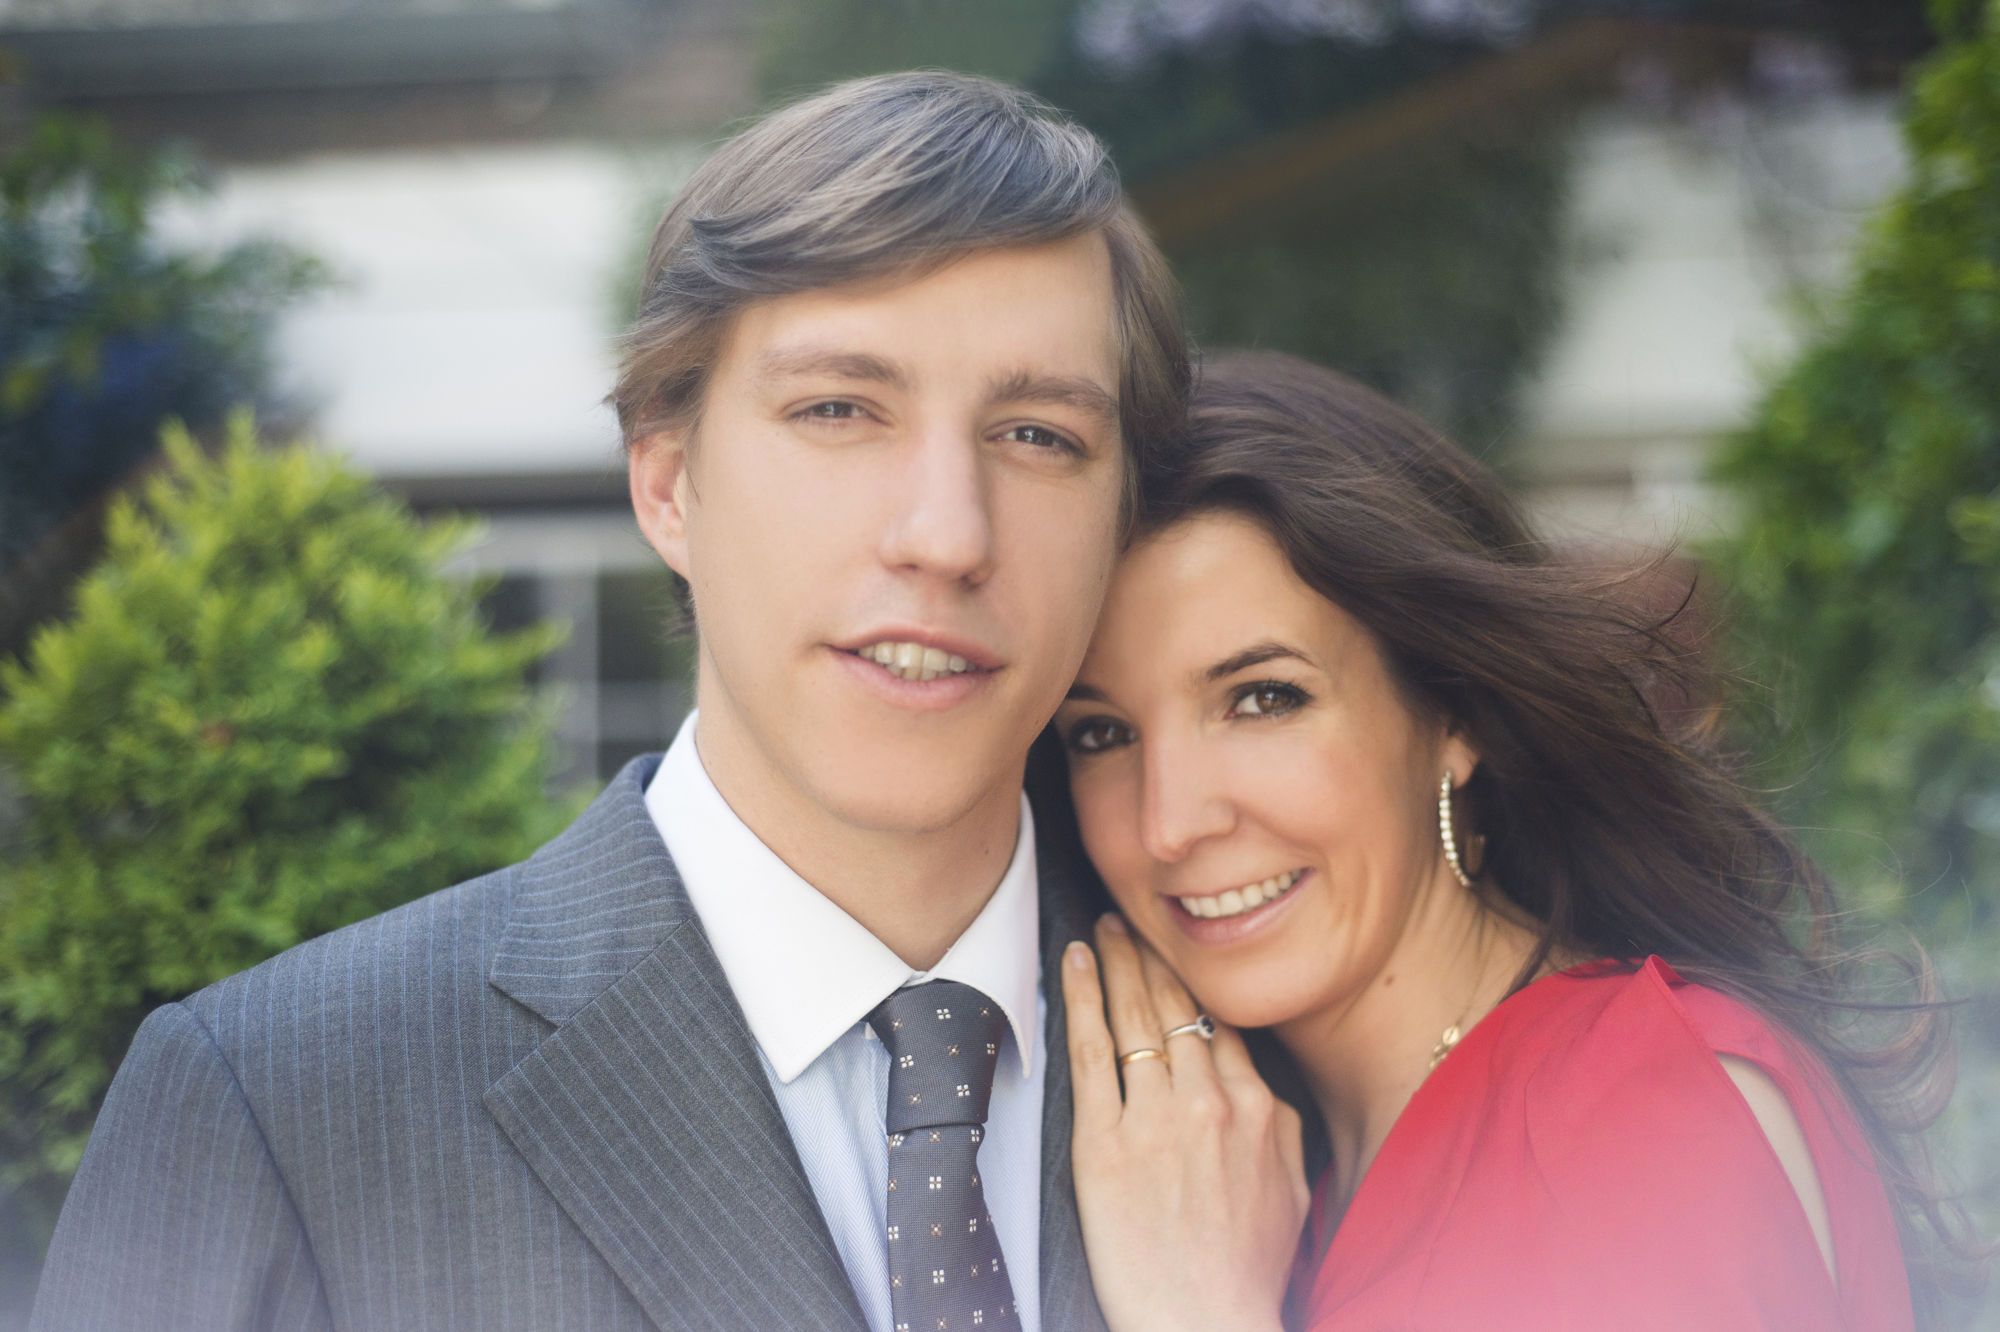 Prince Louis of Luxembourg and Princess Tessy of Luxembourg on